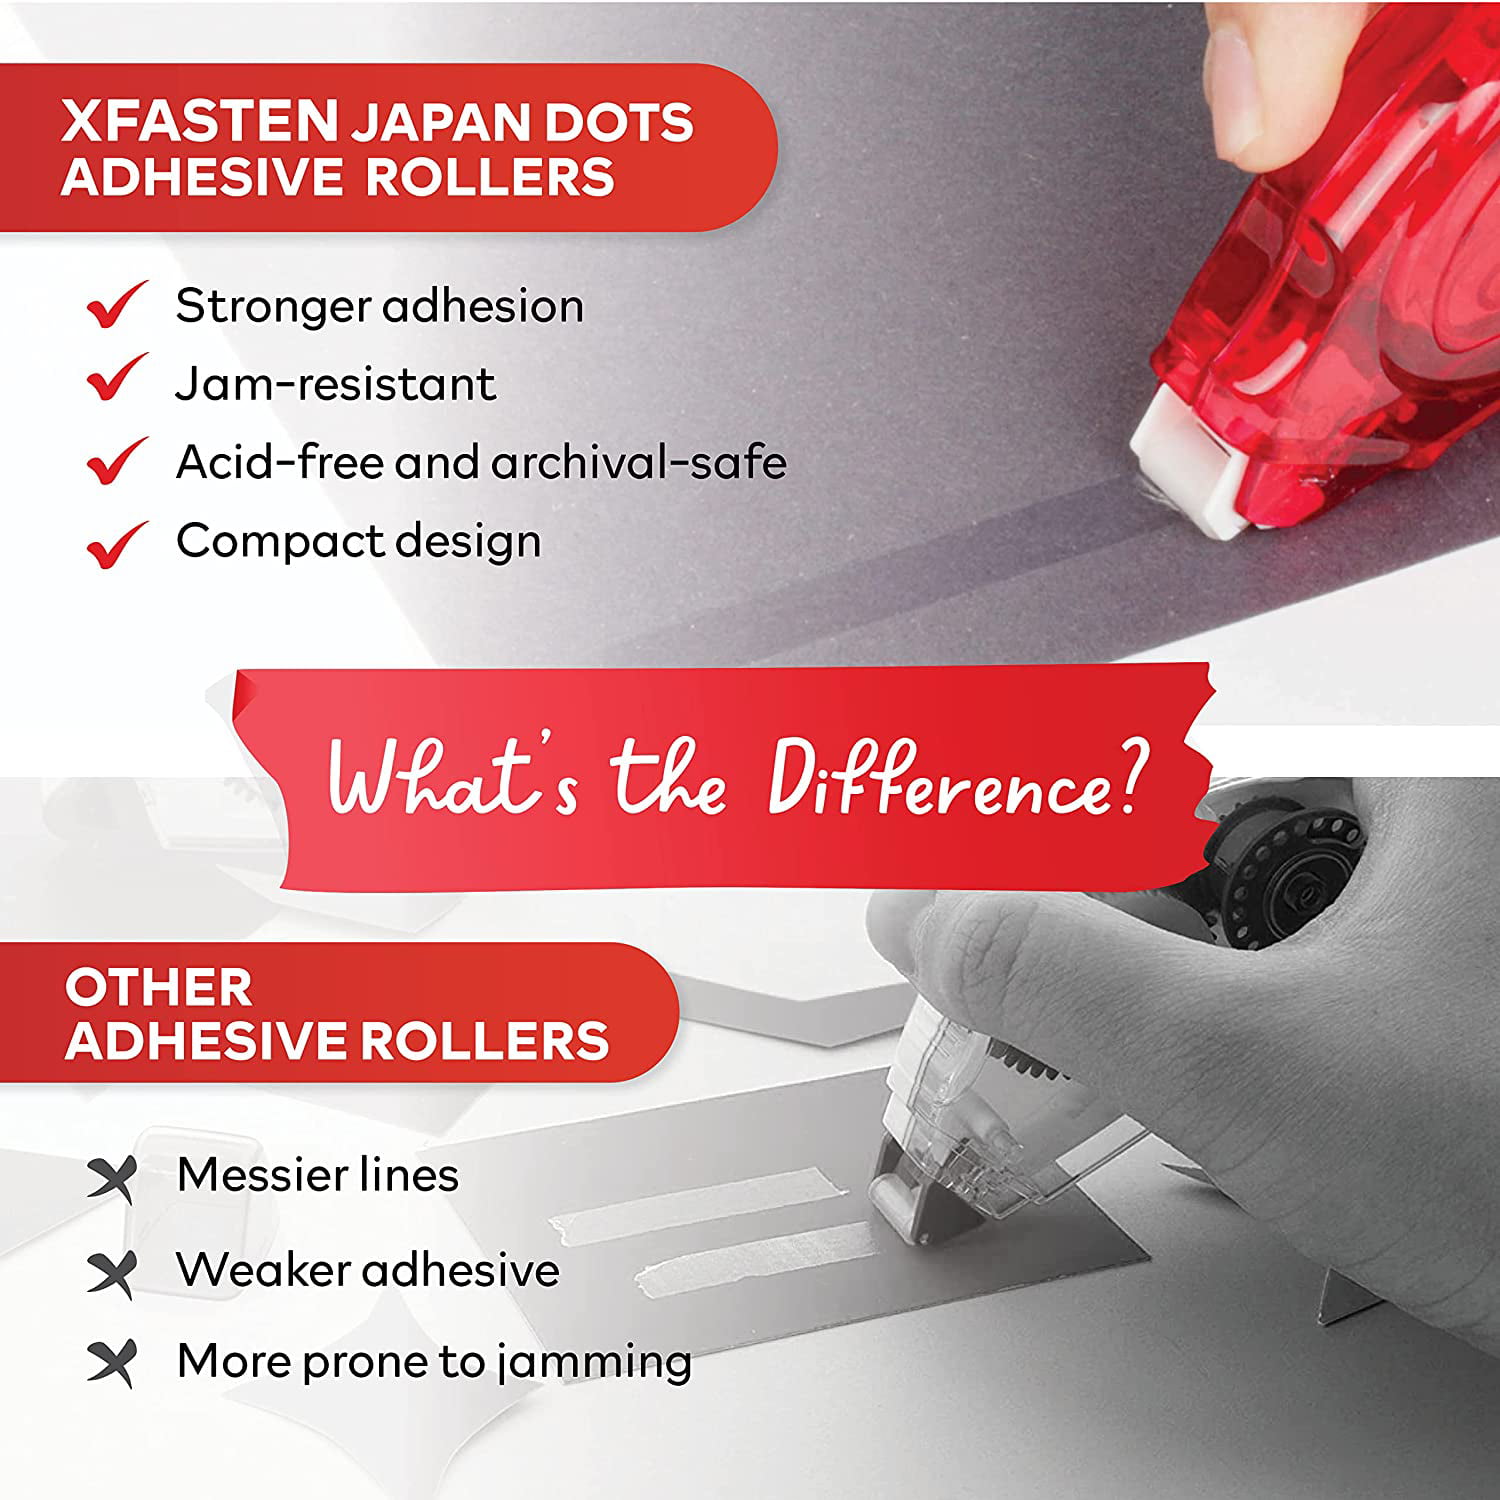 XFasten Japan Dots Double Sided Adhesive Roller | 8mm x 26 Feet | Clear |  12-Pack